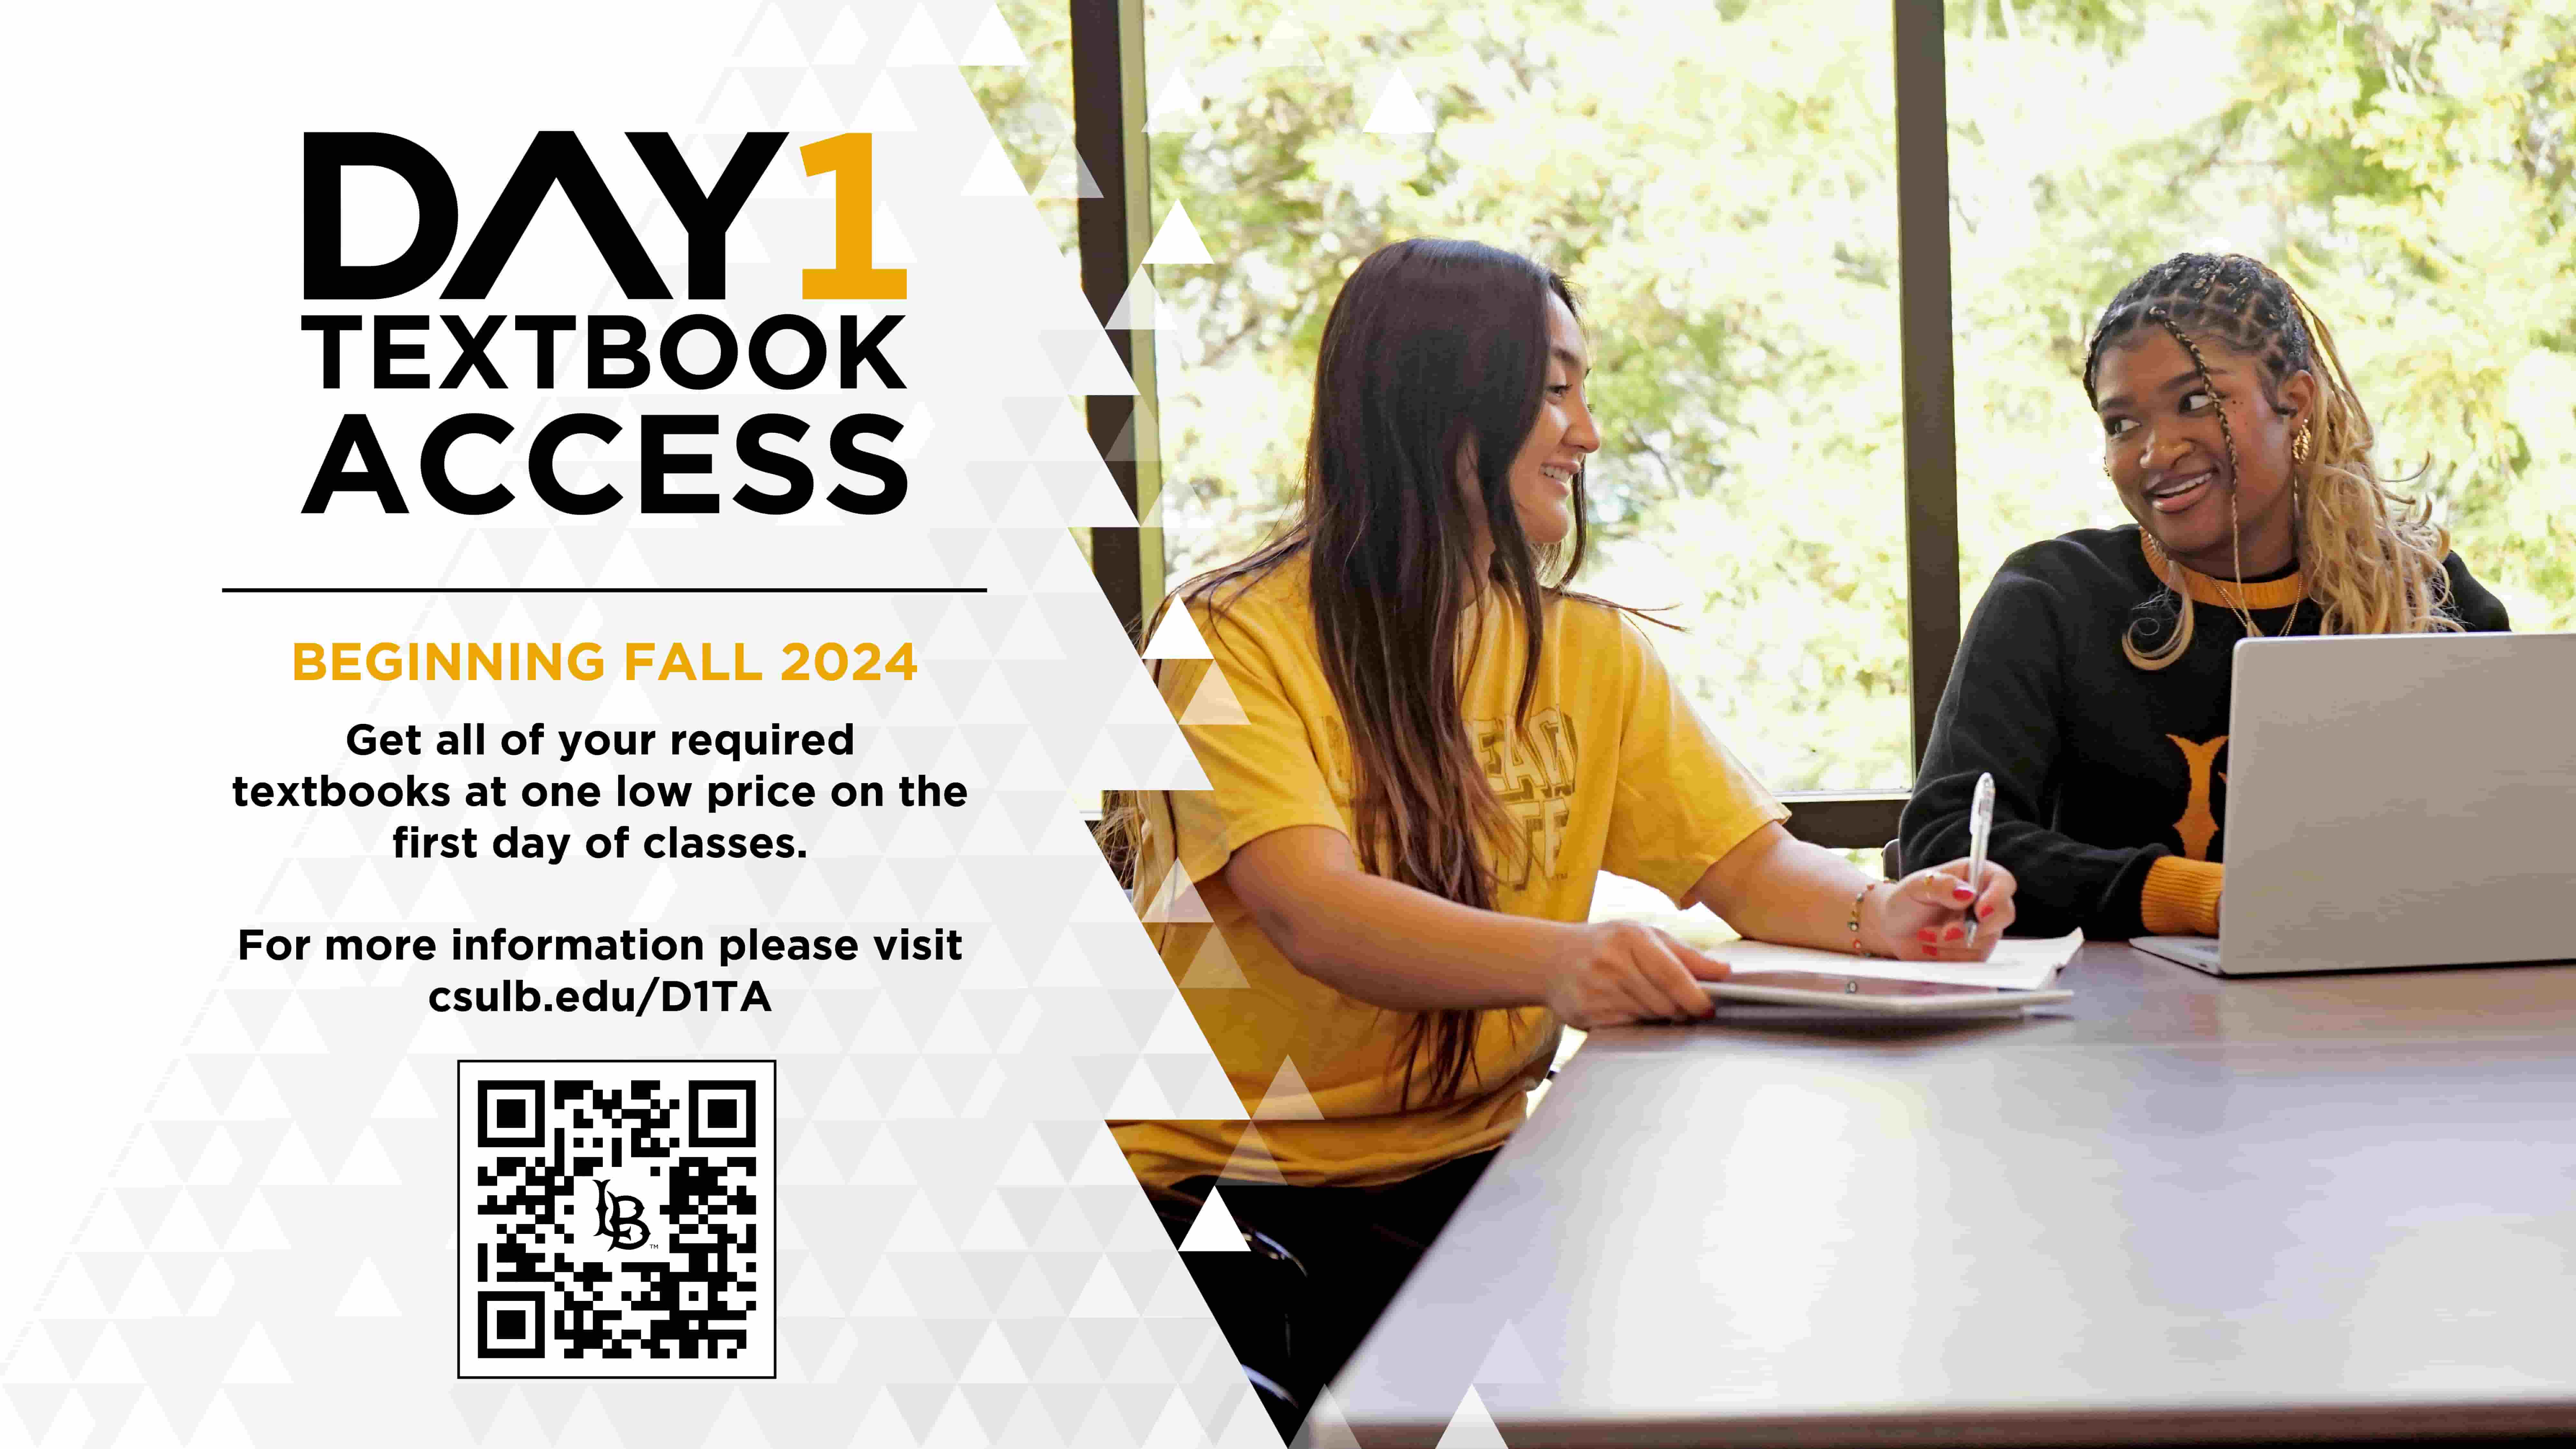 Day 1 Textbook Access